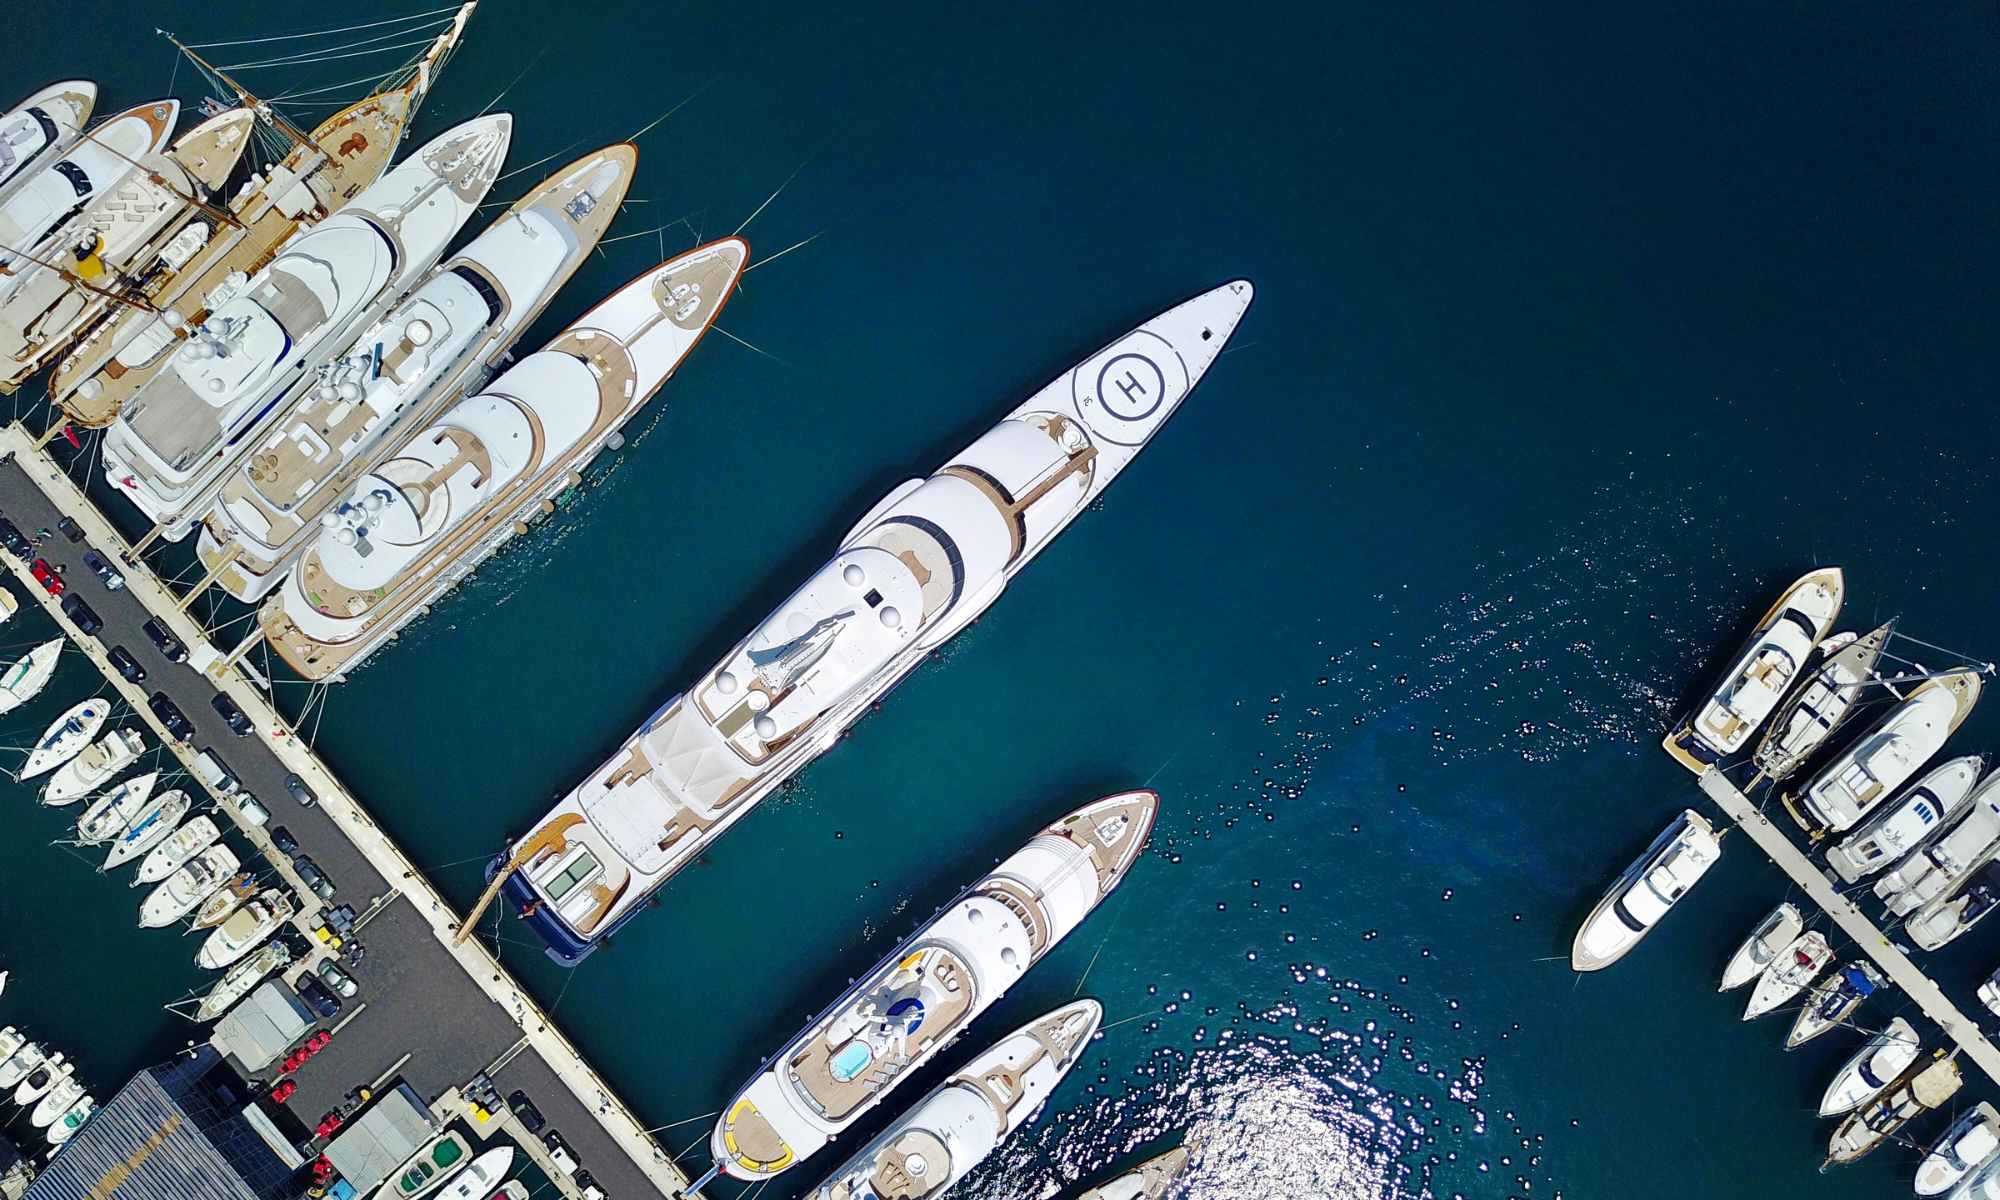 Water Regulations On Yachts: Does Your Yacht Comply